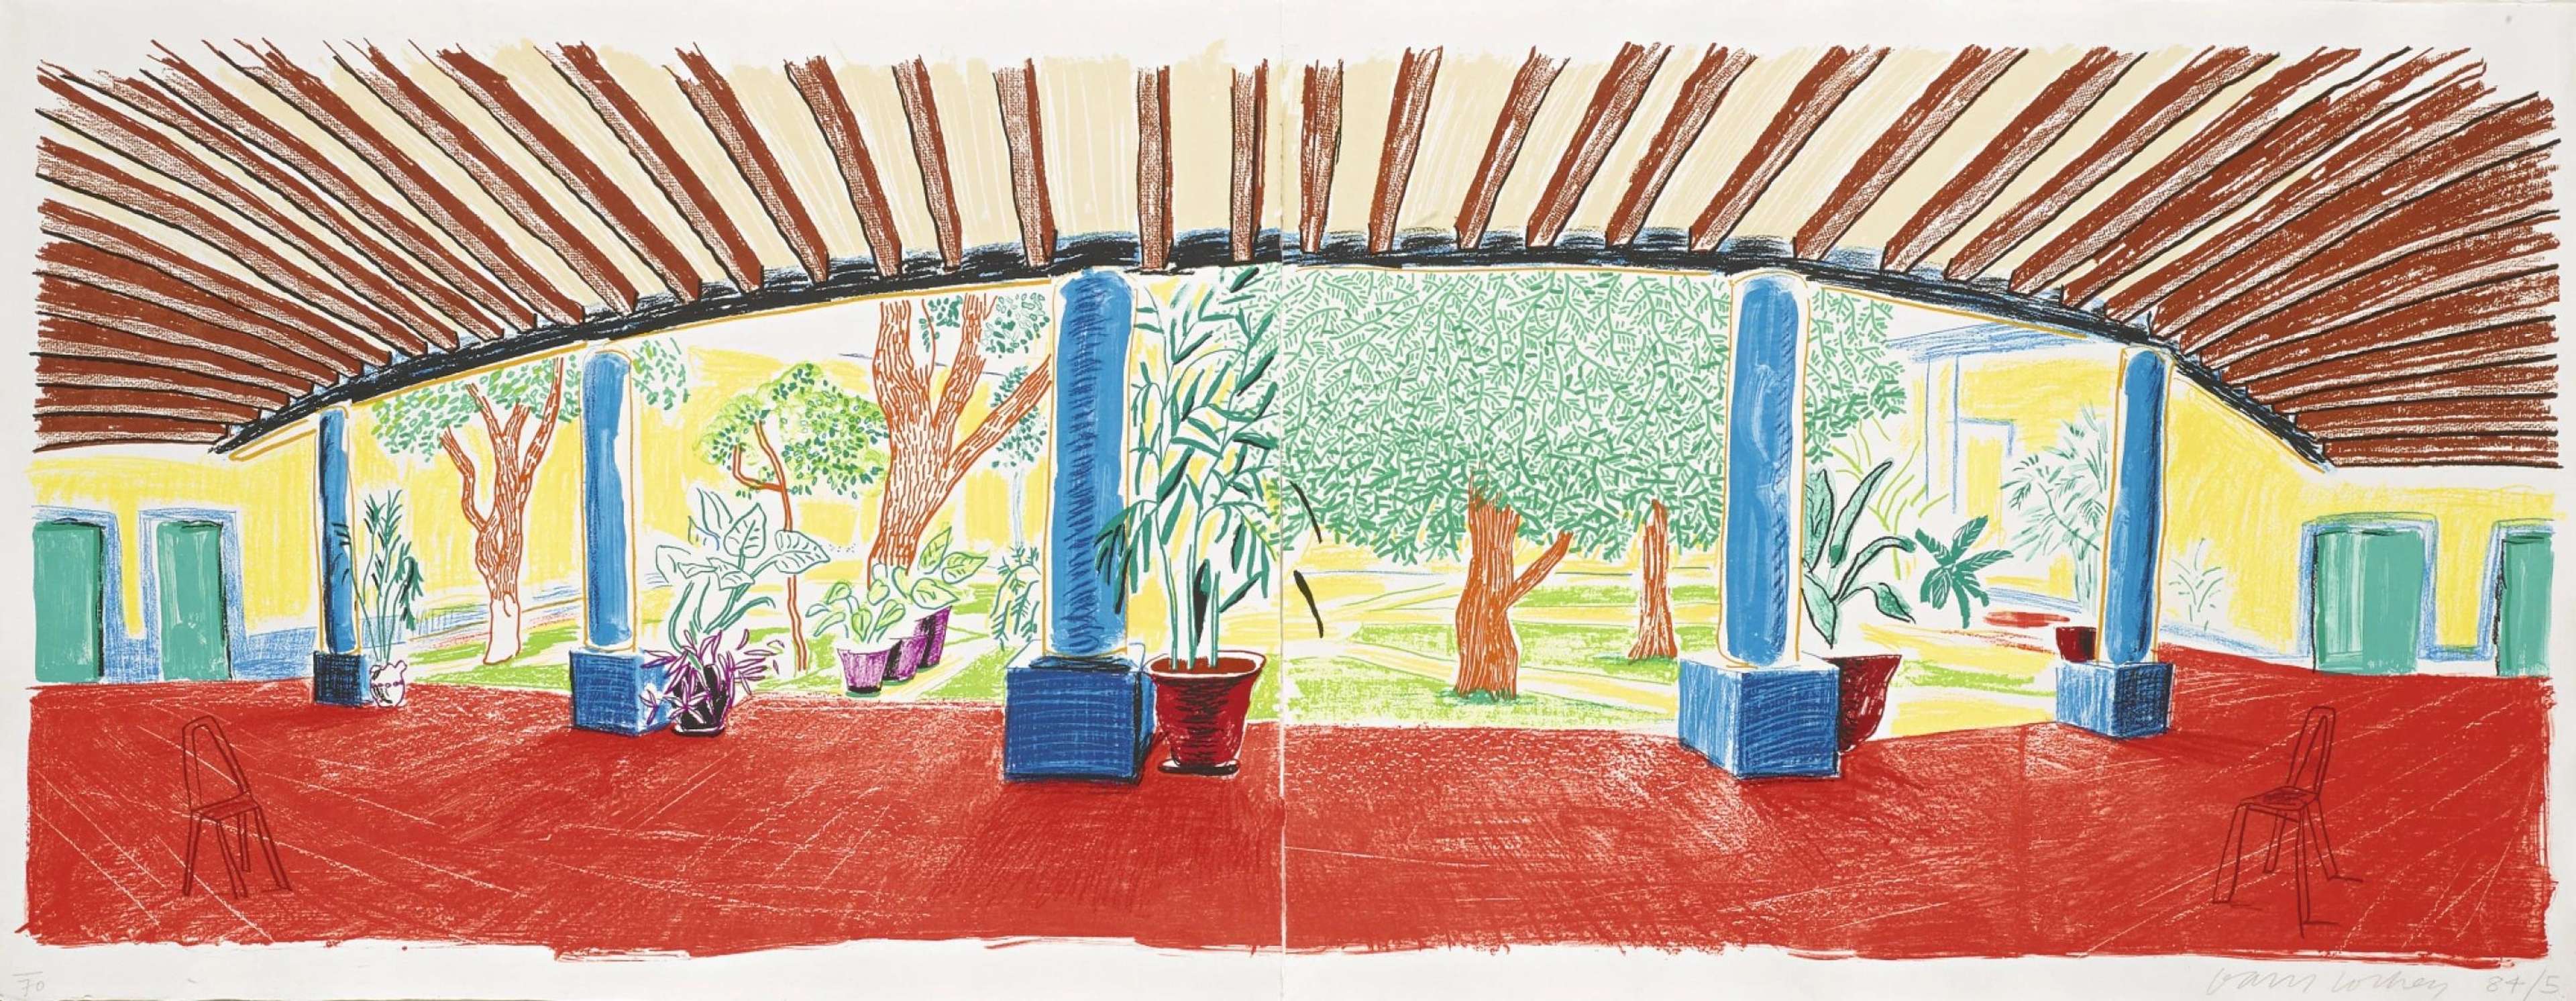 David Hockney's Hotel Acatlán: First Day. A lithographic print of Hotel Acatlán's courtyard from an interior perspective. 